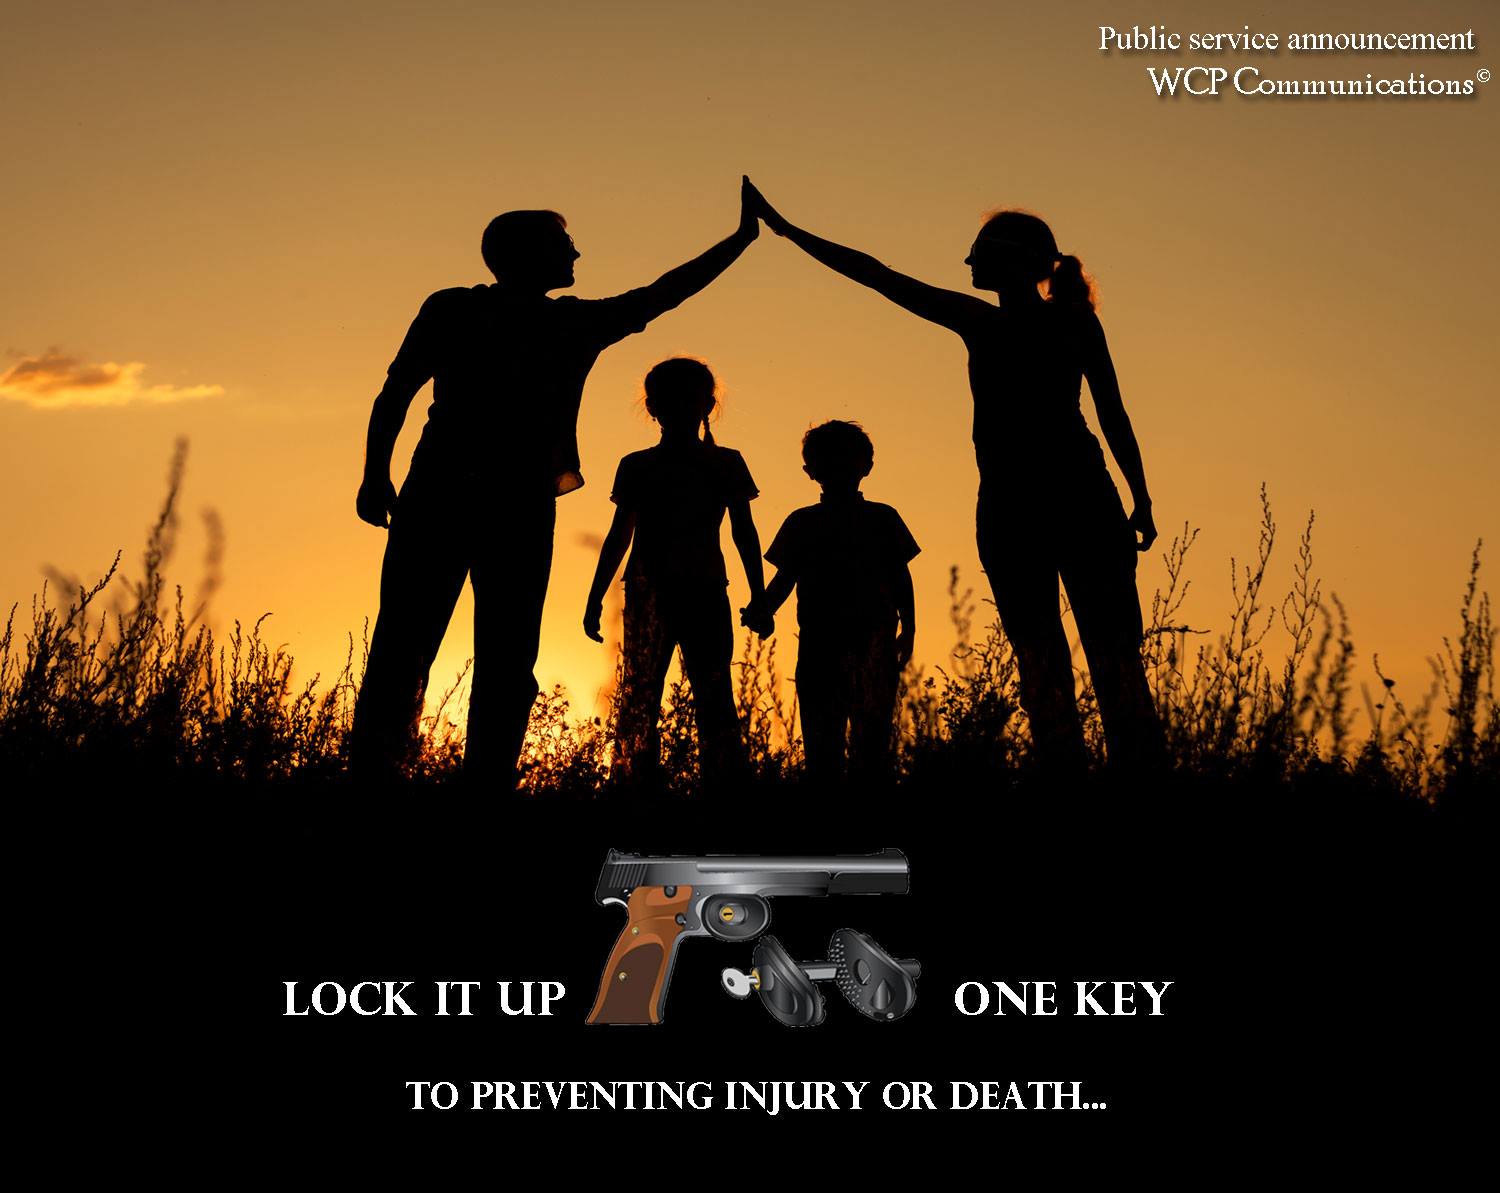 LOCK IT UP! One KEY to preventing INJURY OR DEATH